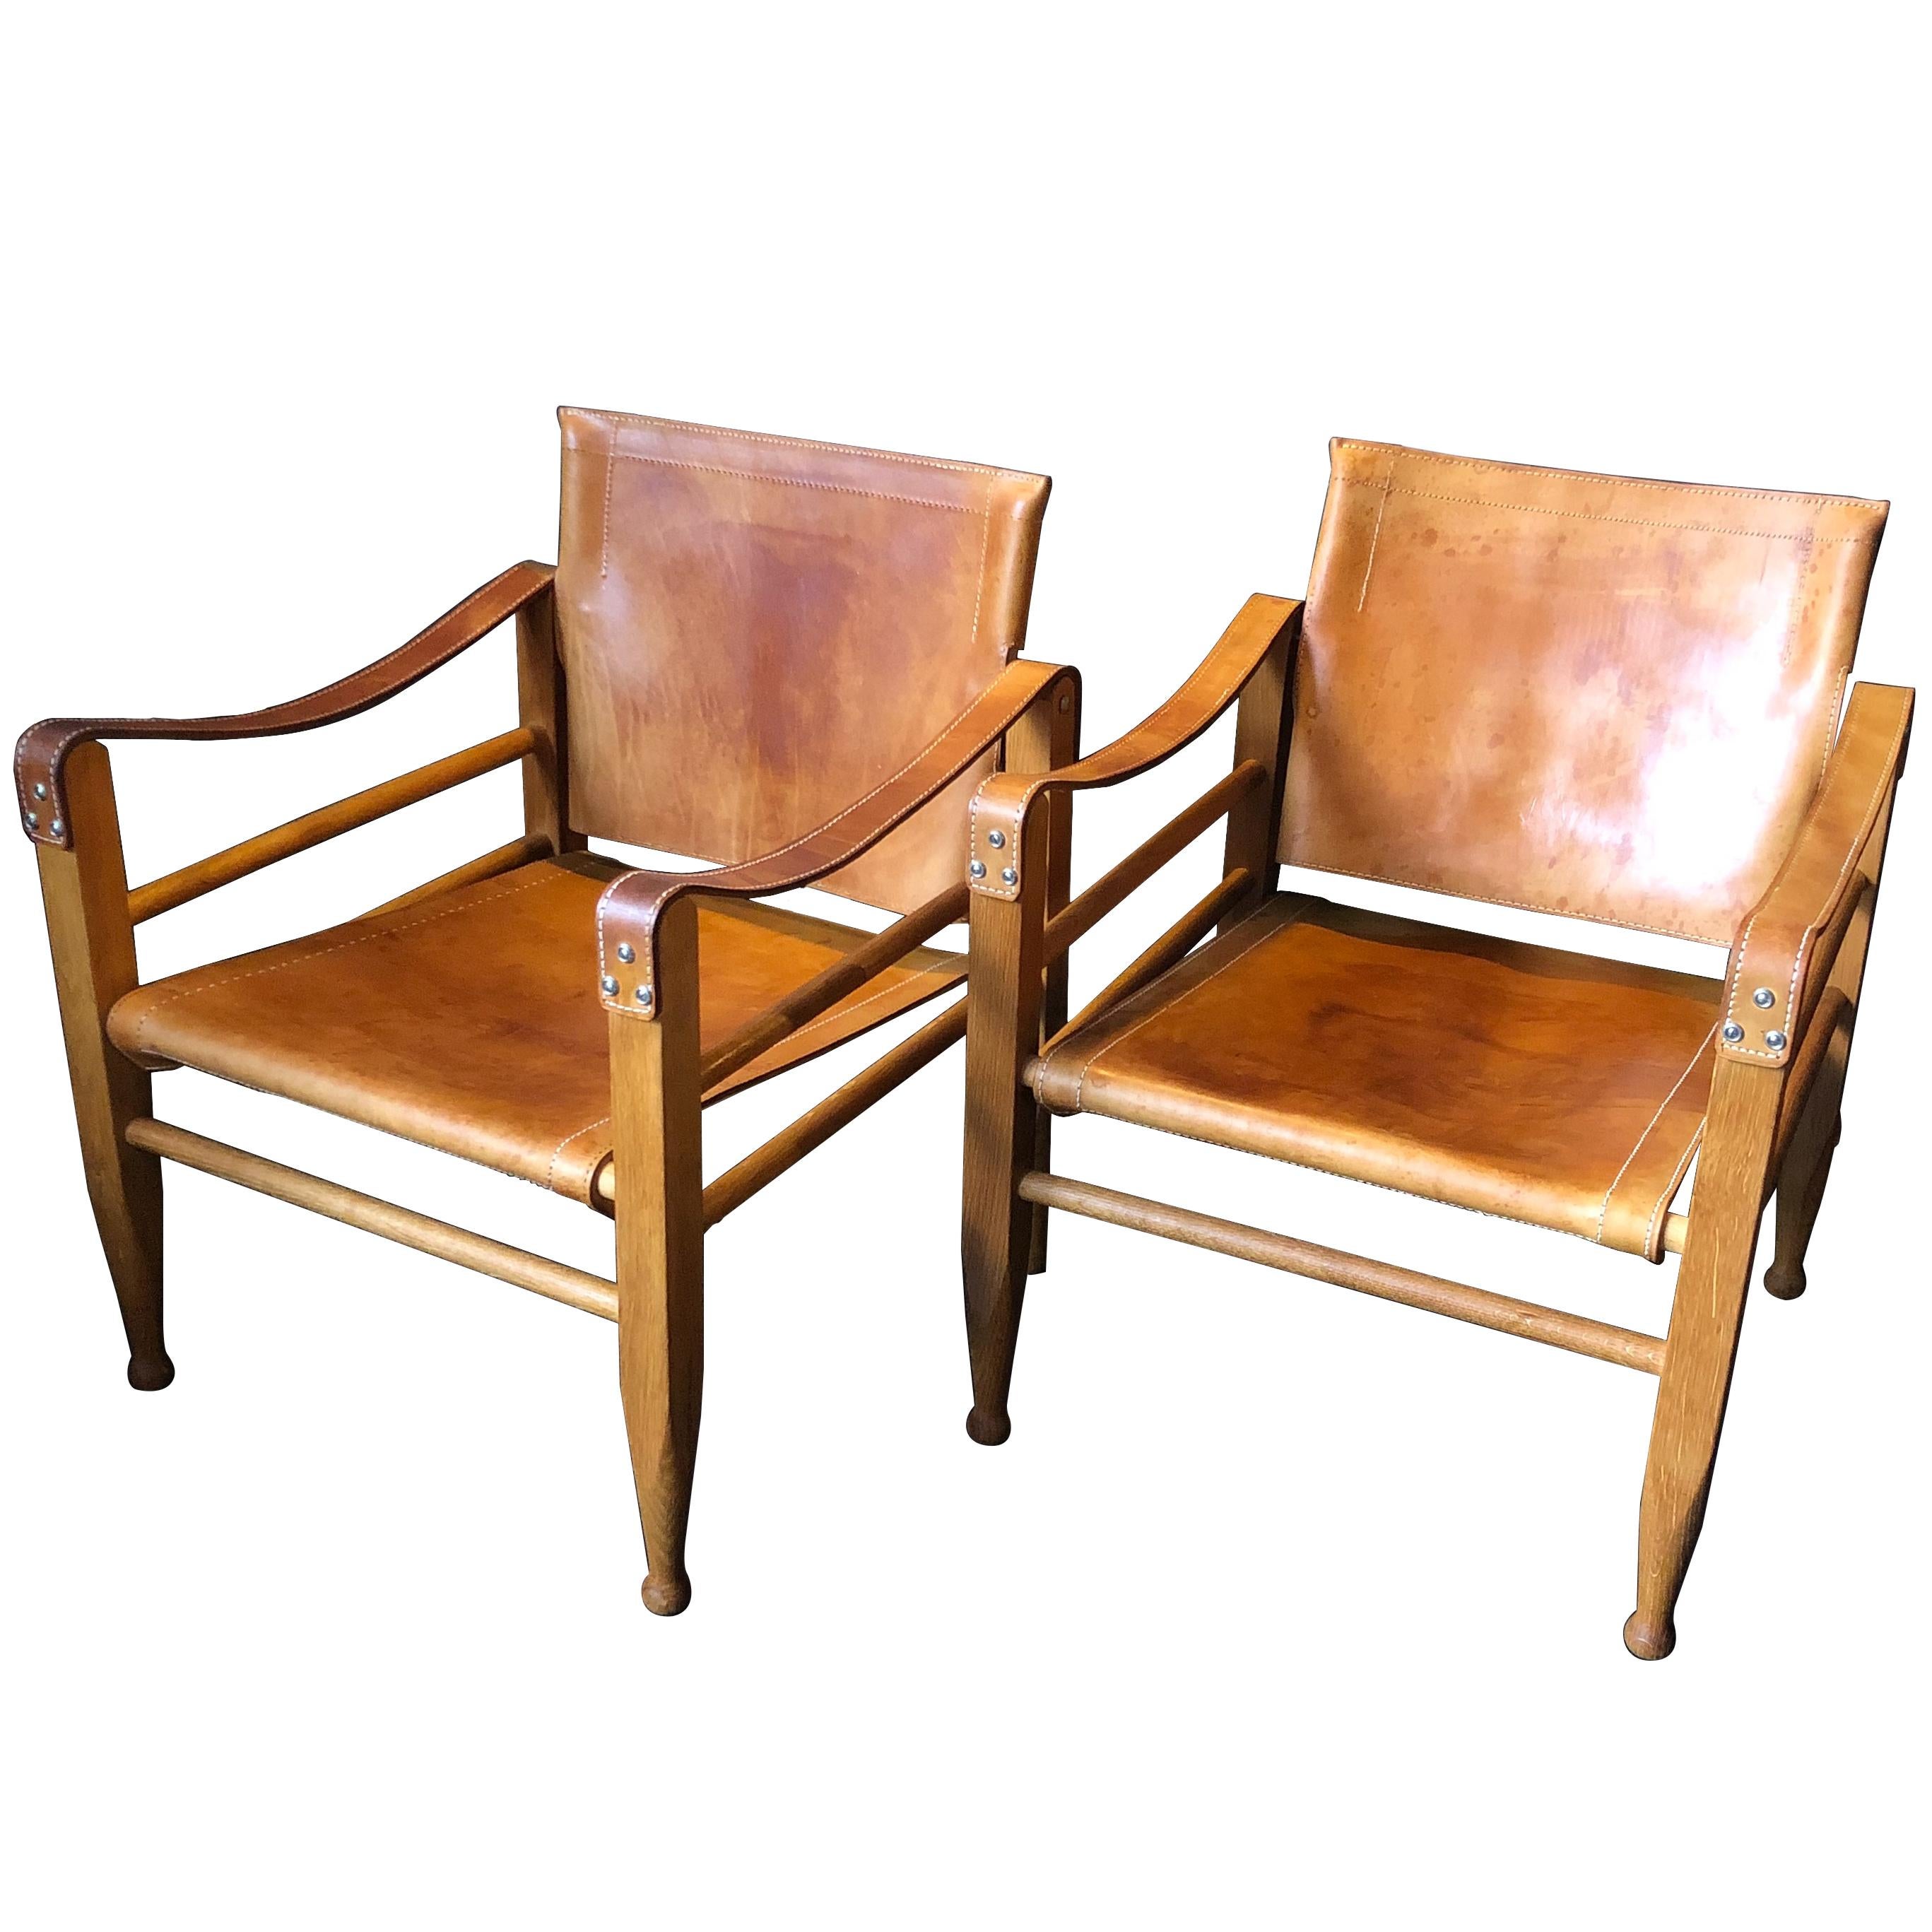 Pair of Safari Chairs and Table, Aage Bruun & Son, Børge Mogensen